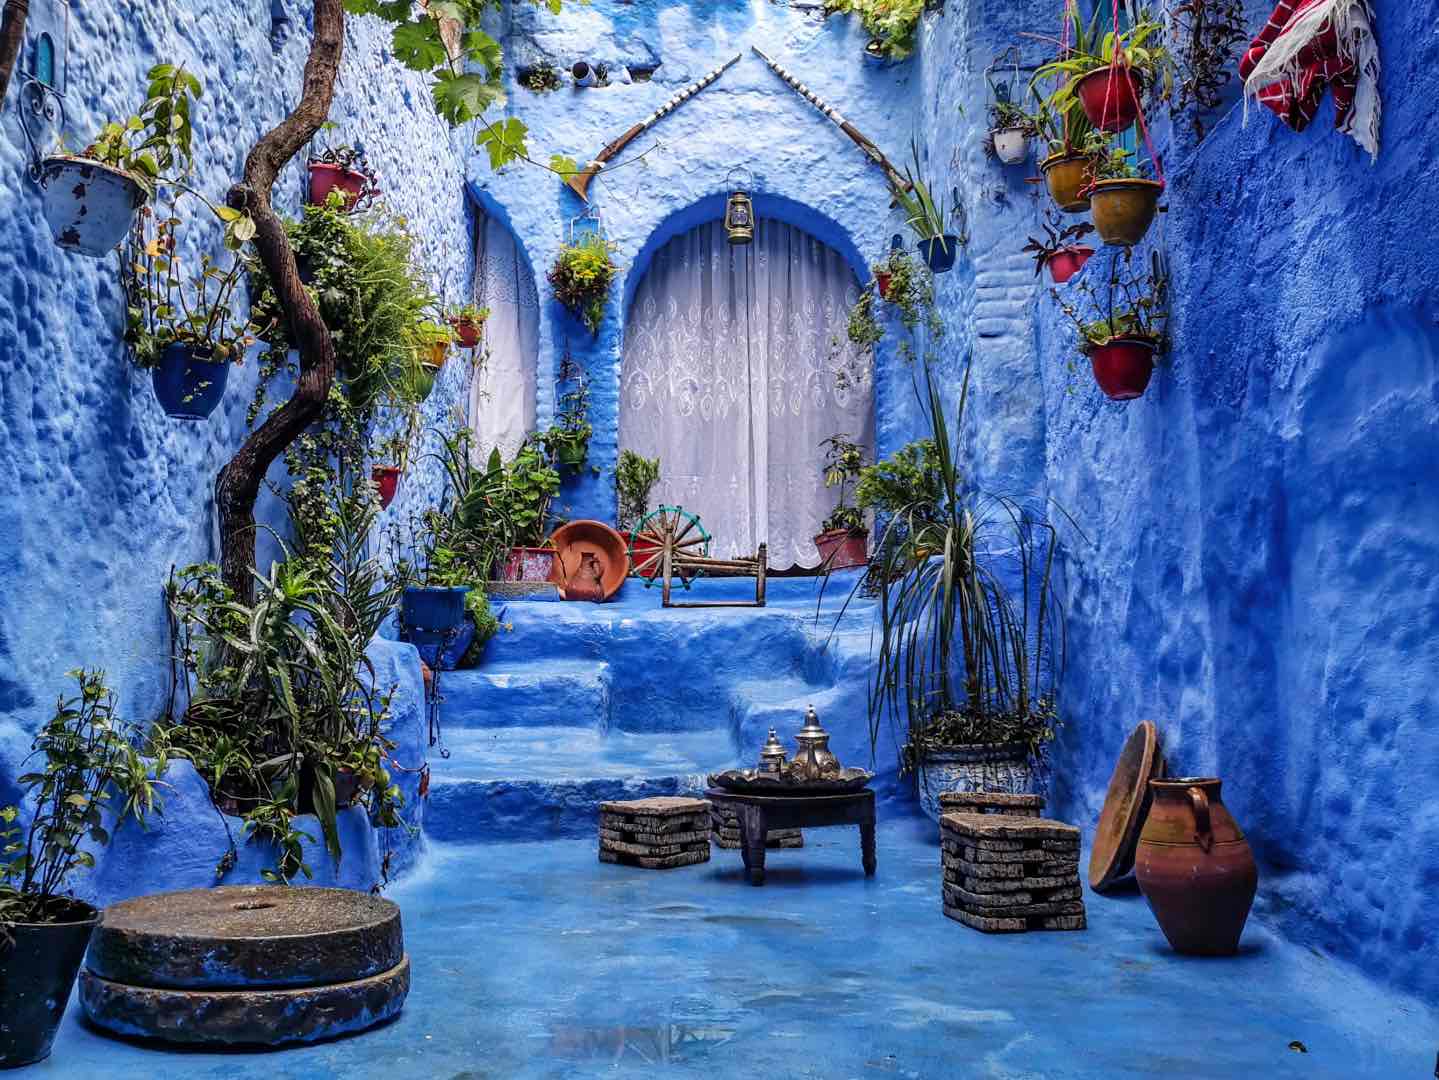 Chefchaouen: The Blue City of Dreams